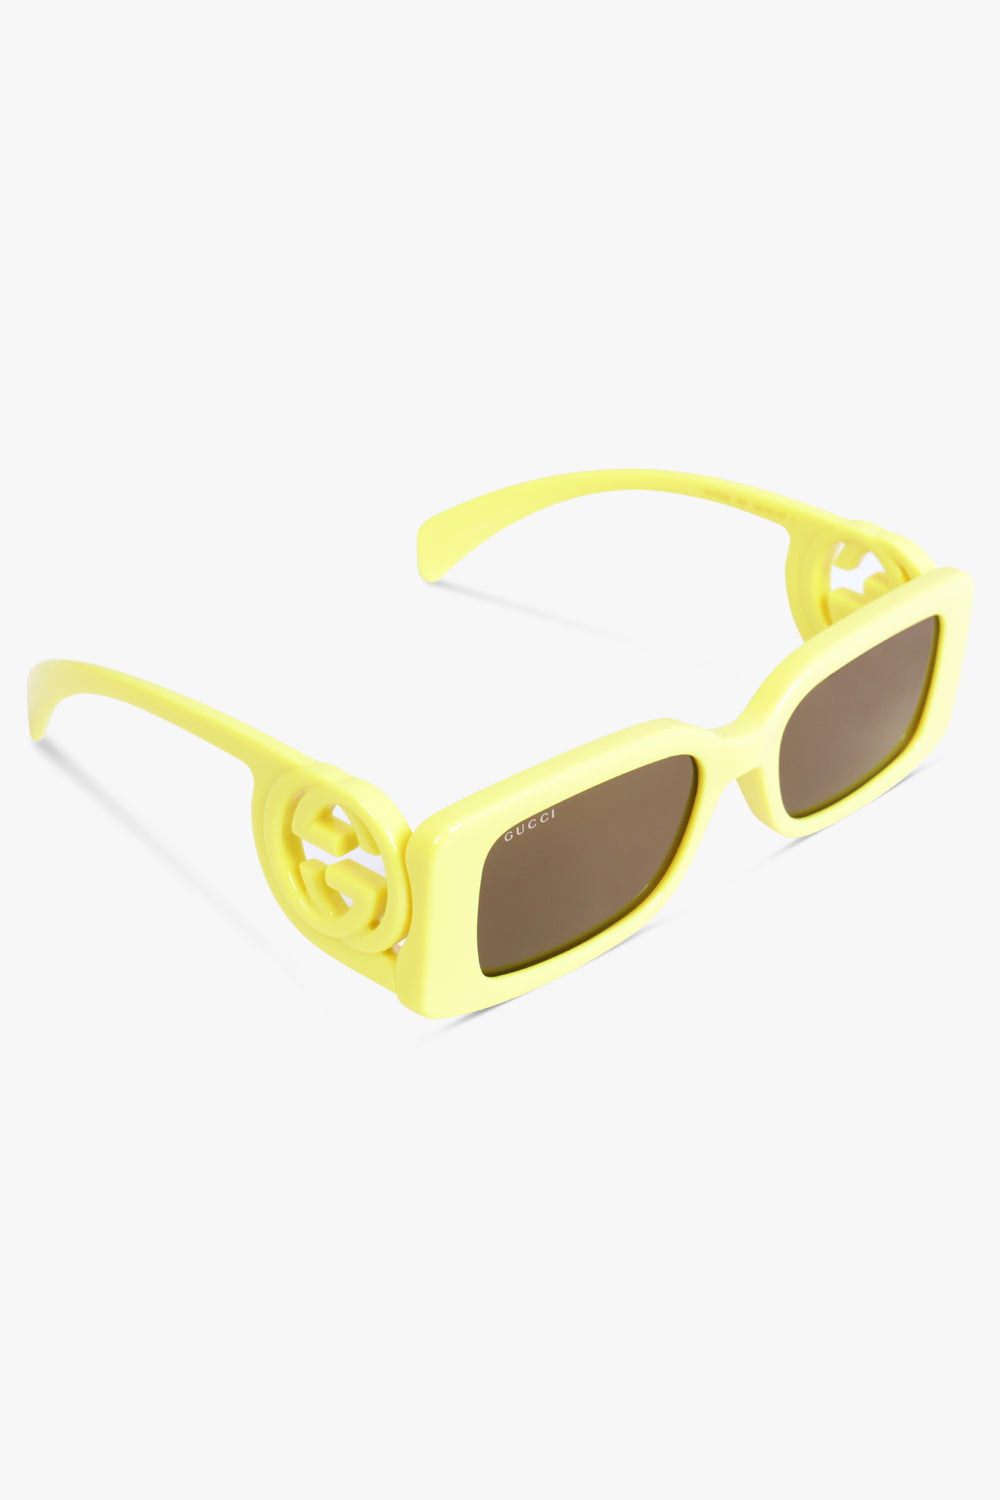 GUCCI ACCESSORIES YELLOW / YELLOW GG1325S 54 Rectangle Frame Side Logo Sunglasses | Yellow